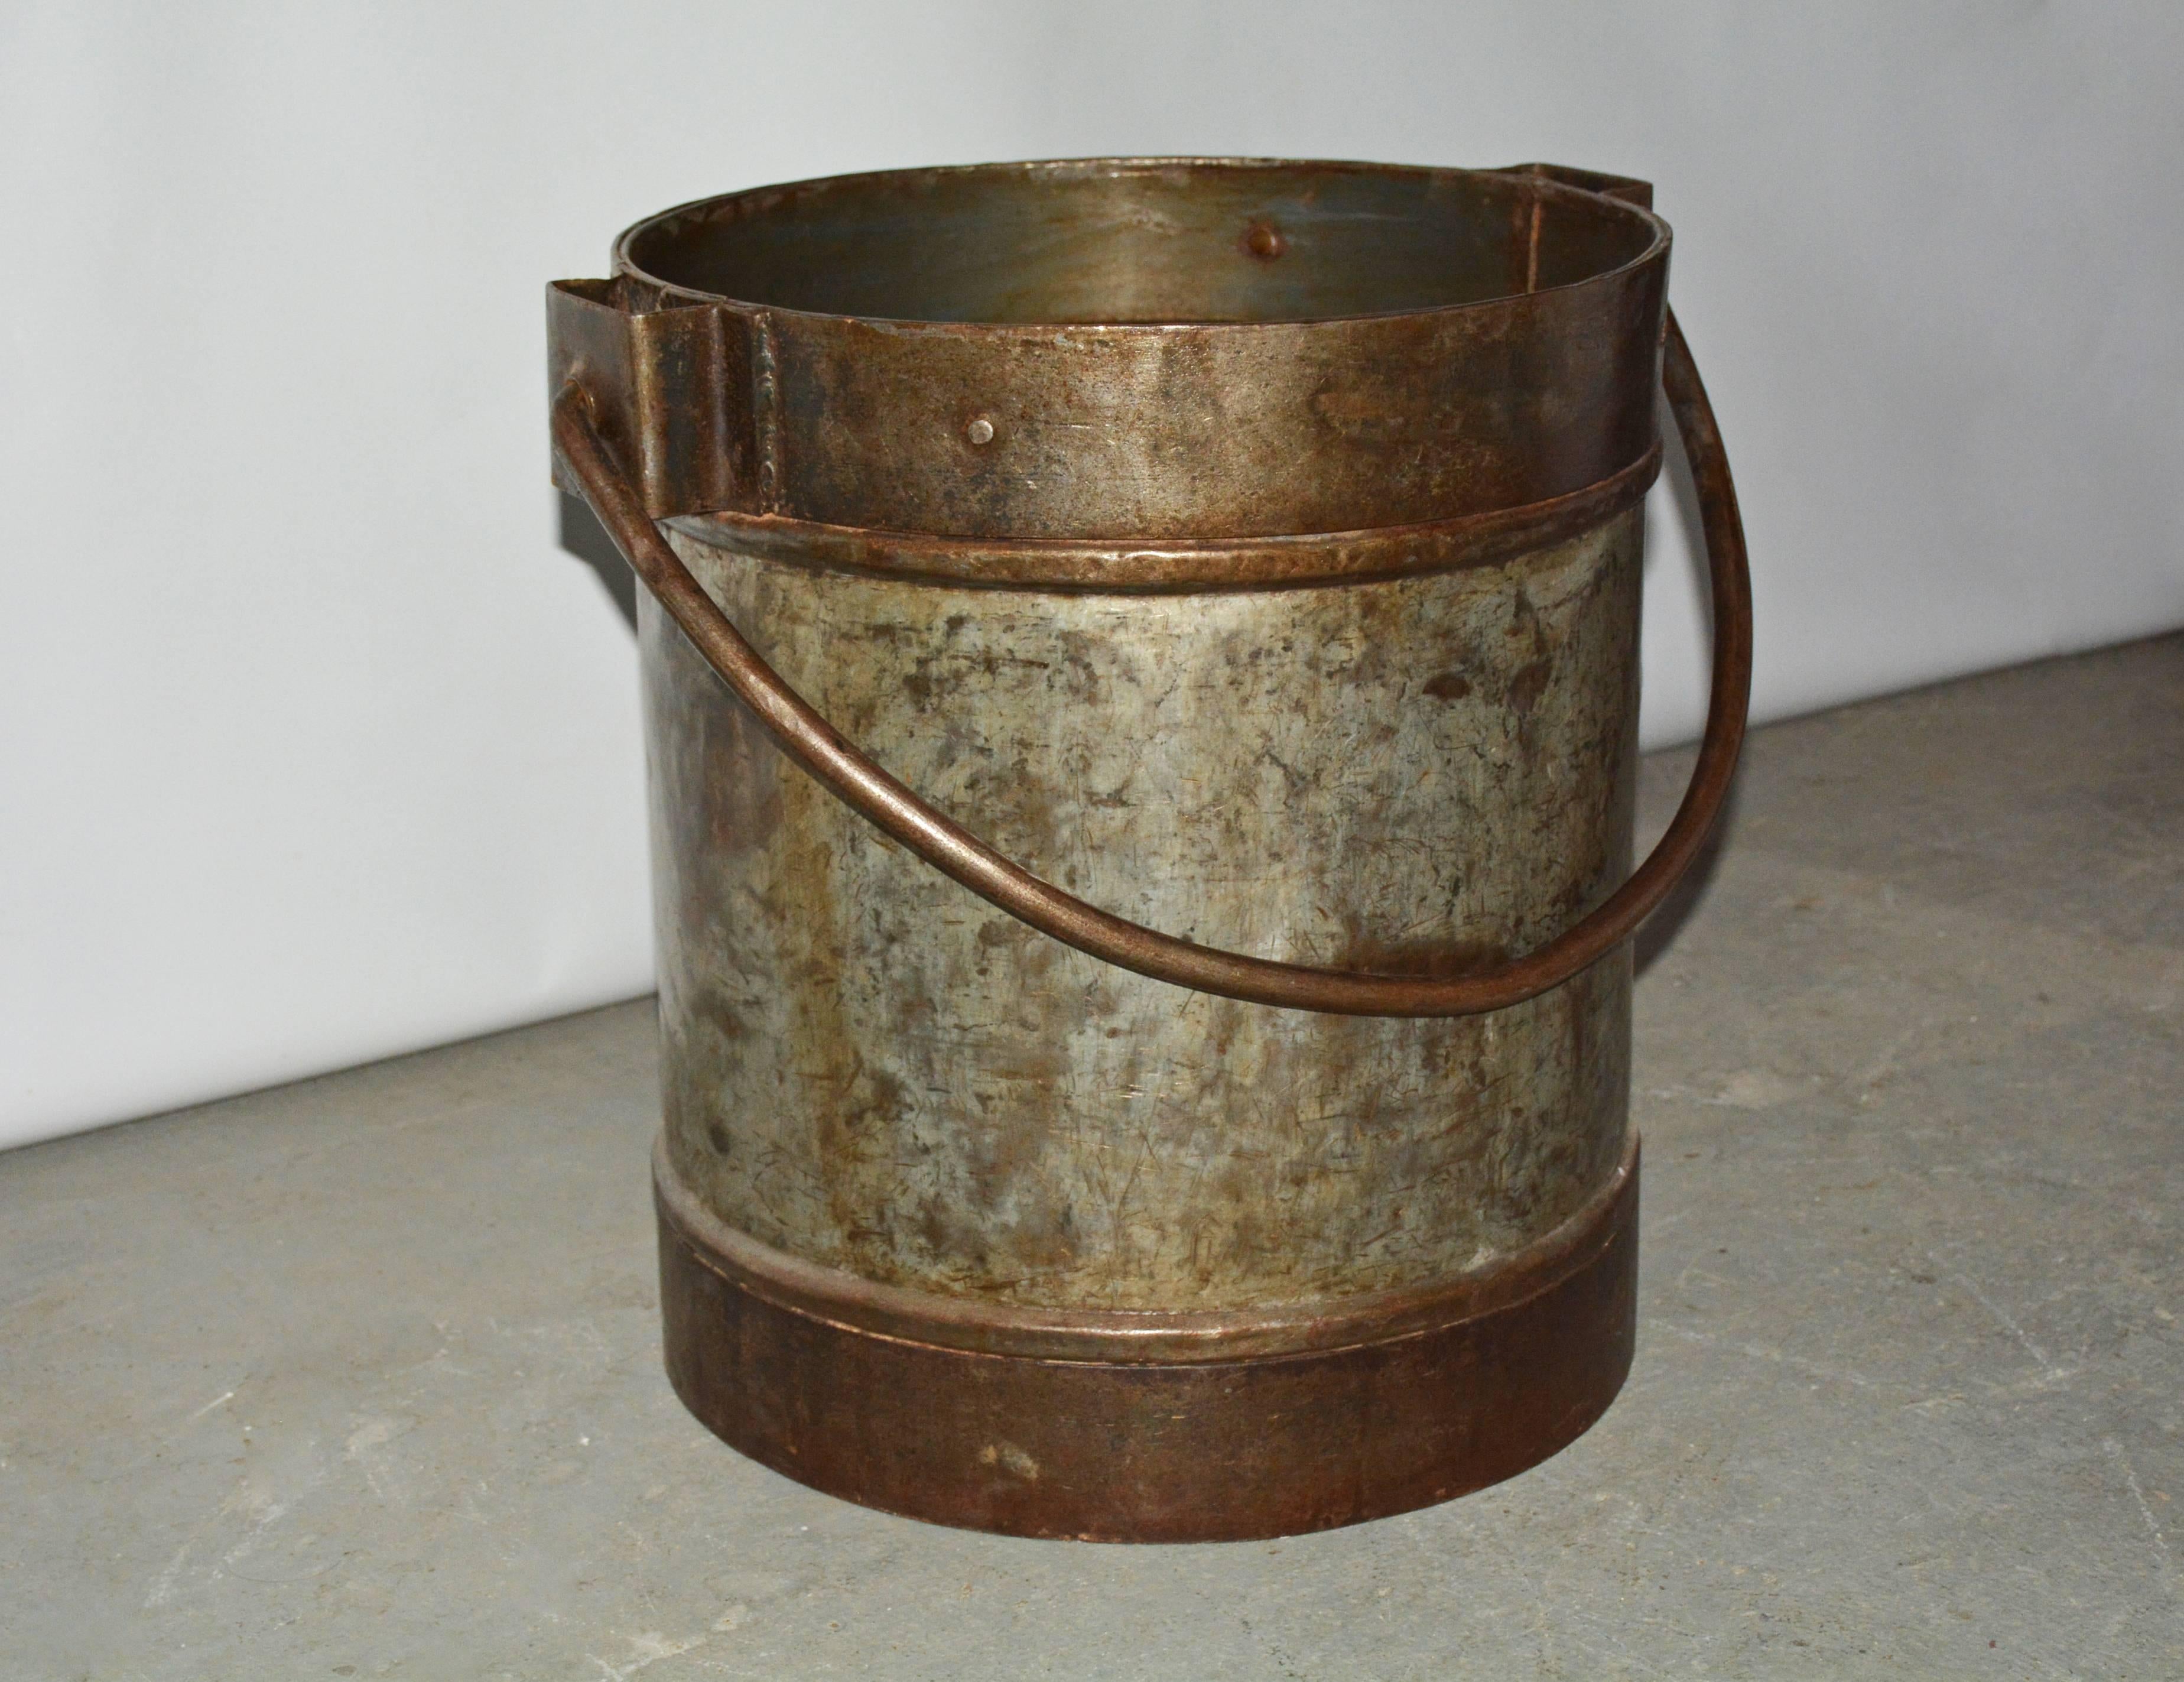 Wonderful antique Industrial iron metal bucket can be used for logs and kindling or put a piece of glass, wood or stone on top and use as a side or end table.  Two matching buckets are available.  Buckets can be used for multiple purposes -- logs